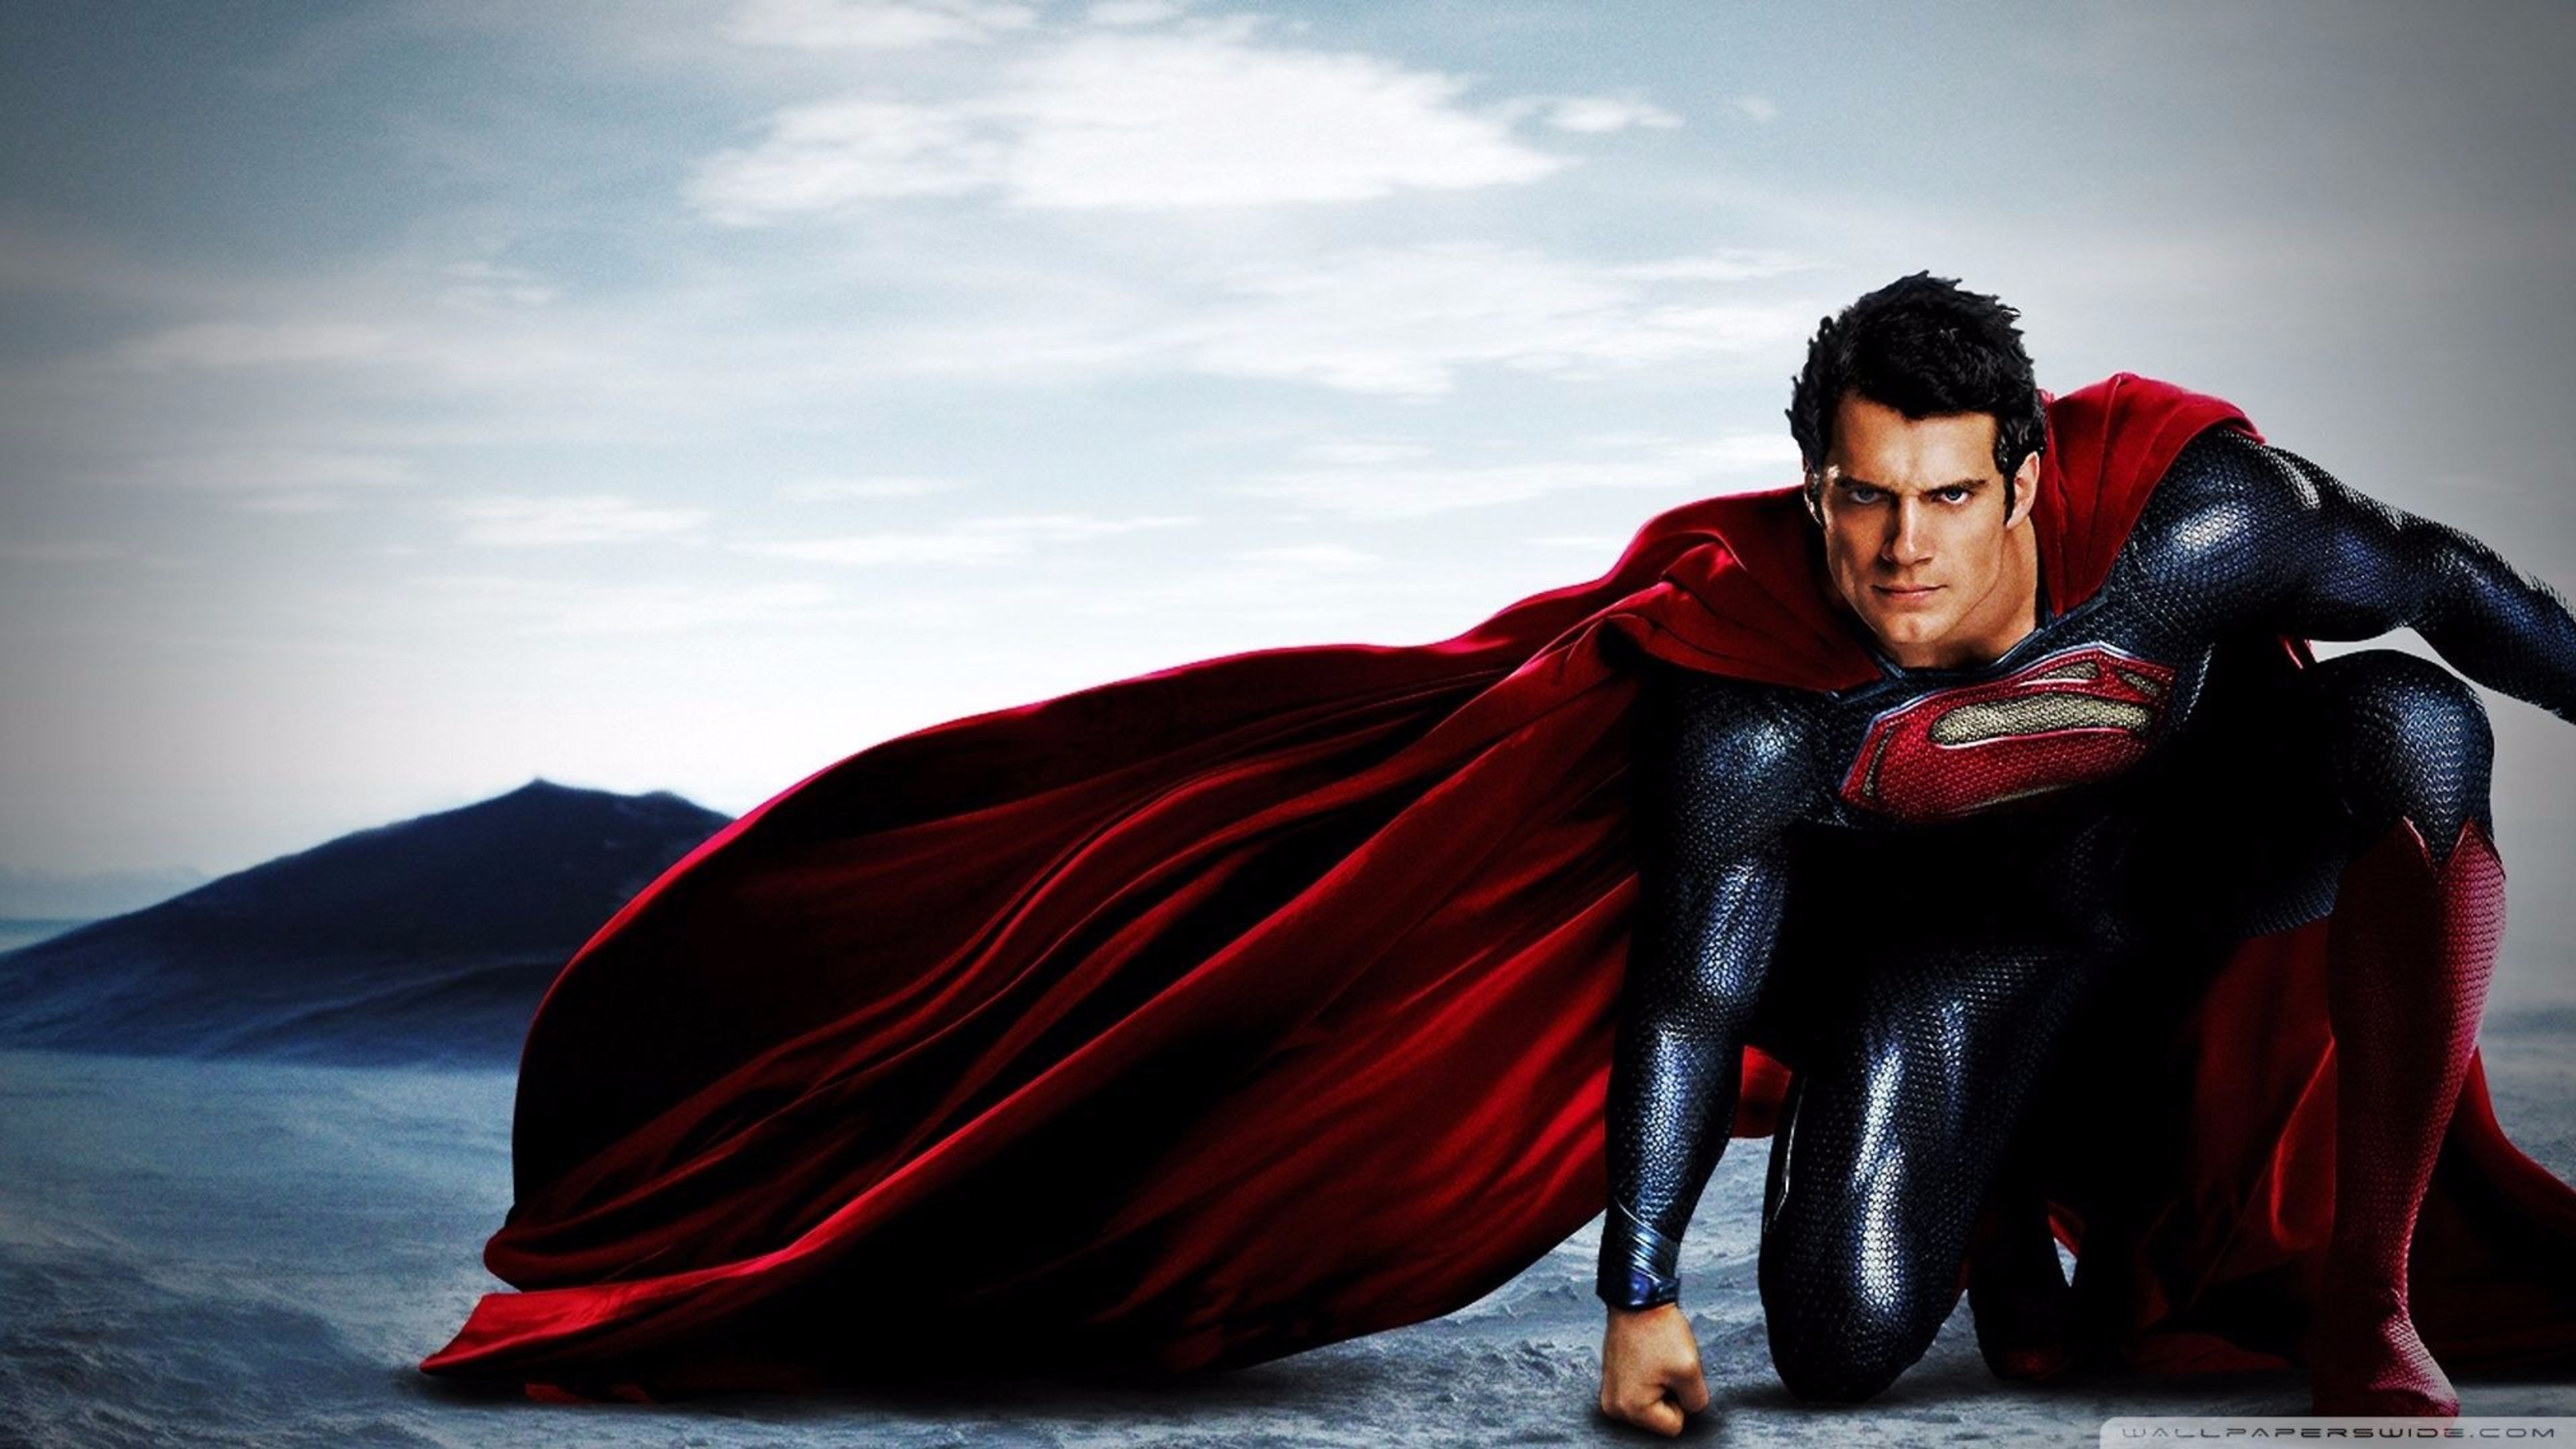 Superman 4K wallpaper for your desktop or mobile screen free and easy to download